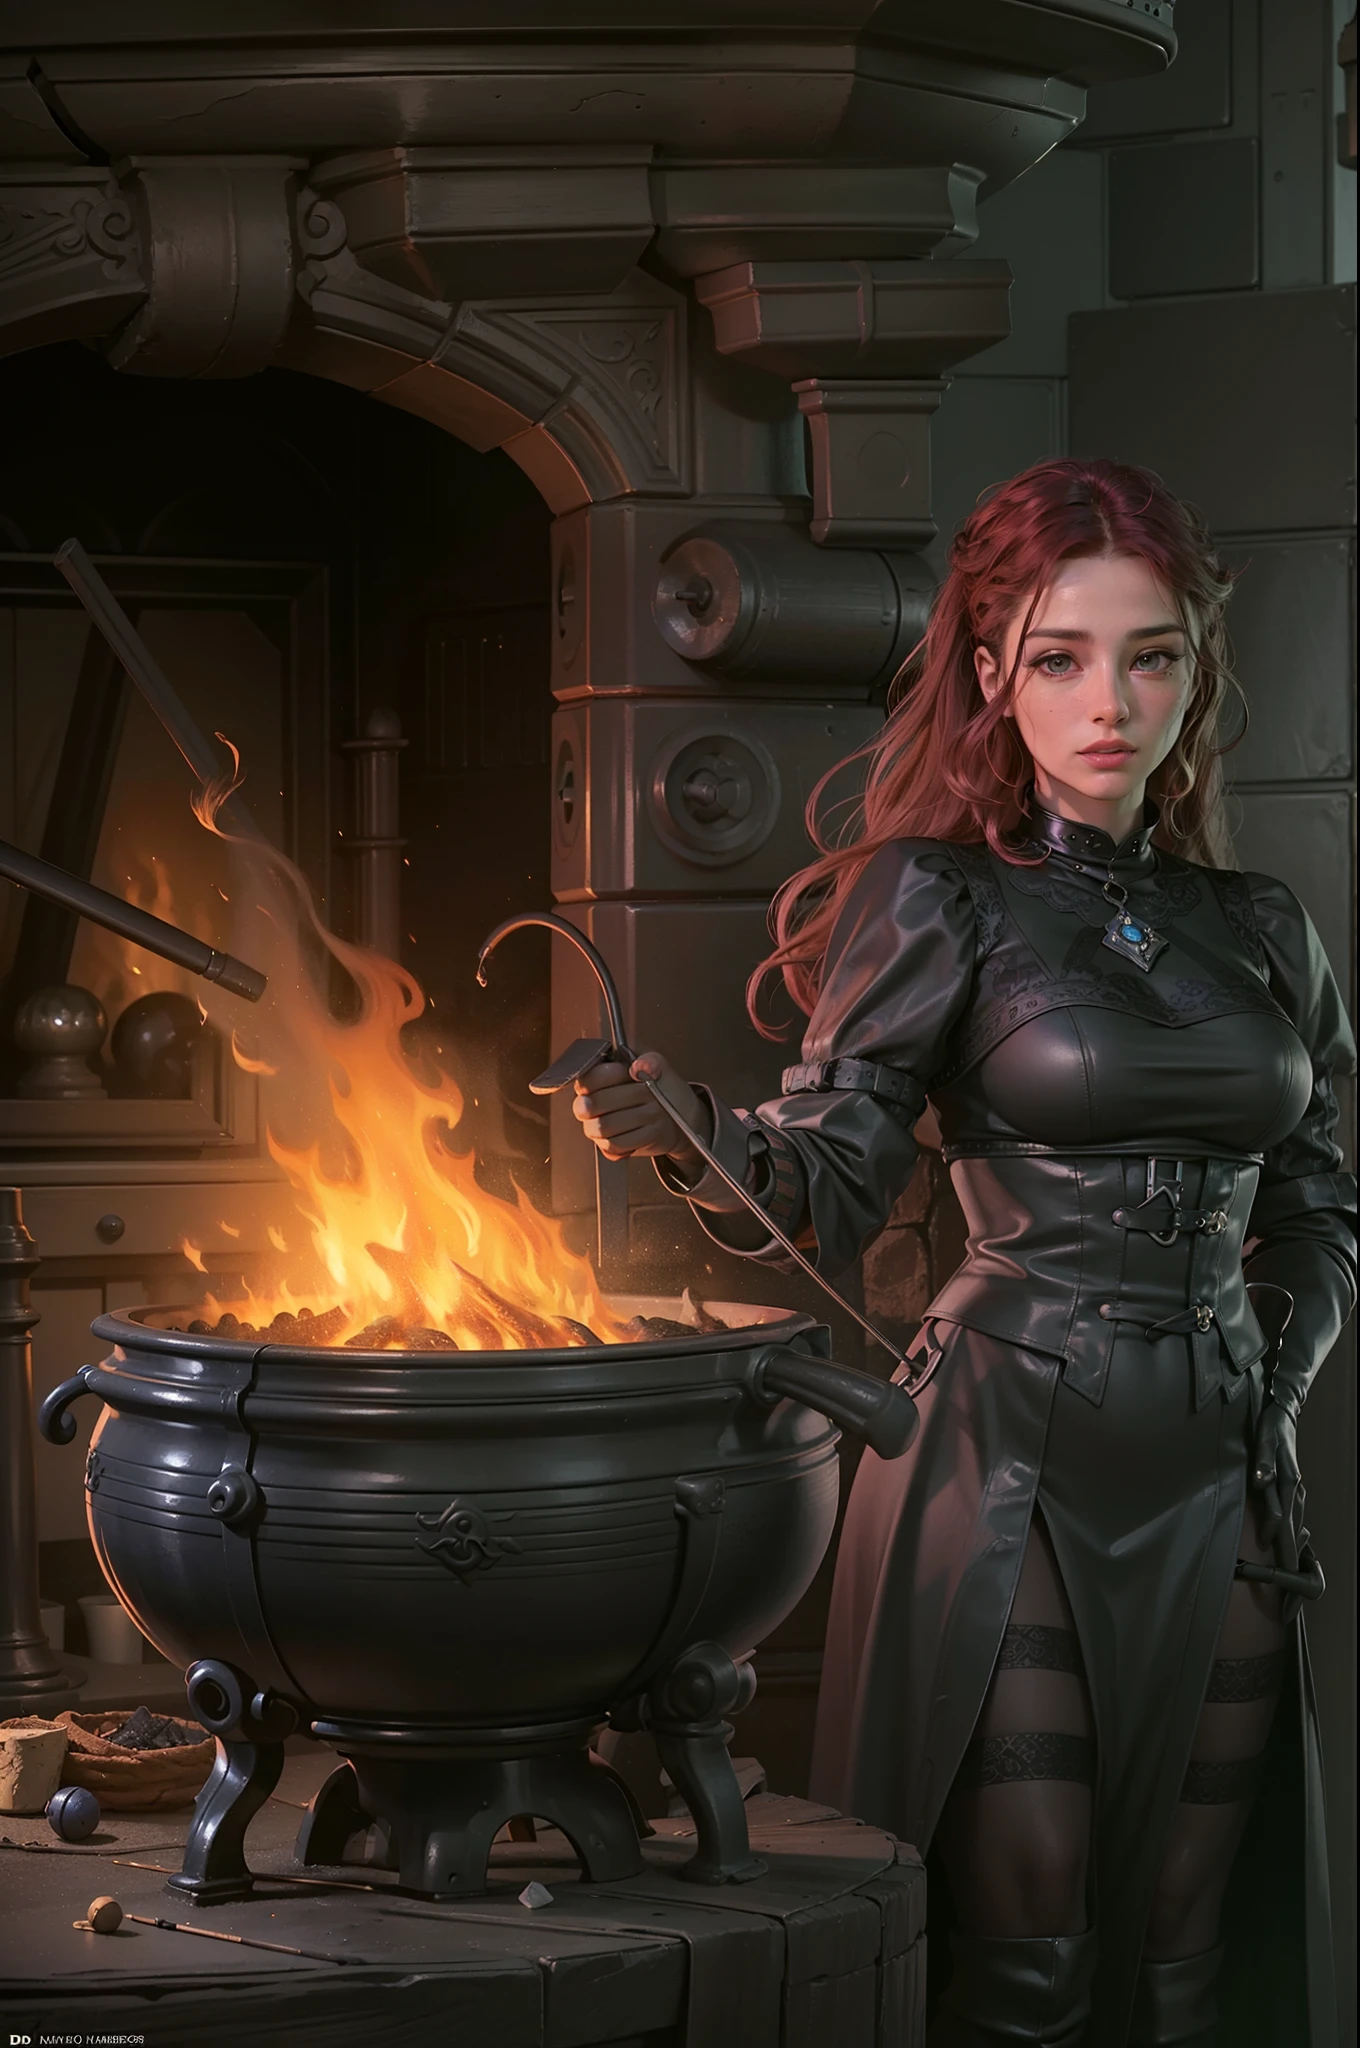 high details, best quality, 16k, RAW, [best detailed], masterpiece, best quality, (extremely detailed), full body (best details, Masterpiece, best quality), , ultra wide shot, photorealistic, fantasy art, RPG art, D&D art, a picture of a woman, witch brweing dark matter over big cauldron in the fire place, middle aged woman, exquisite beautiful woman (best details, Masterpiece, best quality), ultra detailed face (best details, Masterpiece, best quality),evil grin, red hair, long hair, wavy hair, dynamic eye color, pale skin, black dress (best details, Masterpiece, best quality), wearing black boots, large boilng cauldron, black cauldron, green mists magic mists, coming from cauldron, a stove, middles ages house background, dim fire light, High Detail, Ultra High Quality, High Resolution, 16K Resolution, Ultra HD Pictures, 3D rendering Ultra Realistic, Clear Details, Realistic Detail, Ultra High Definition Waiting to start